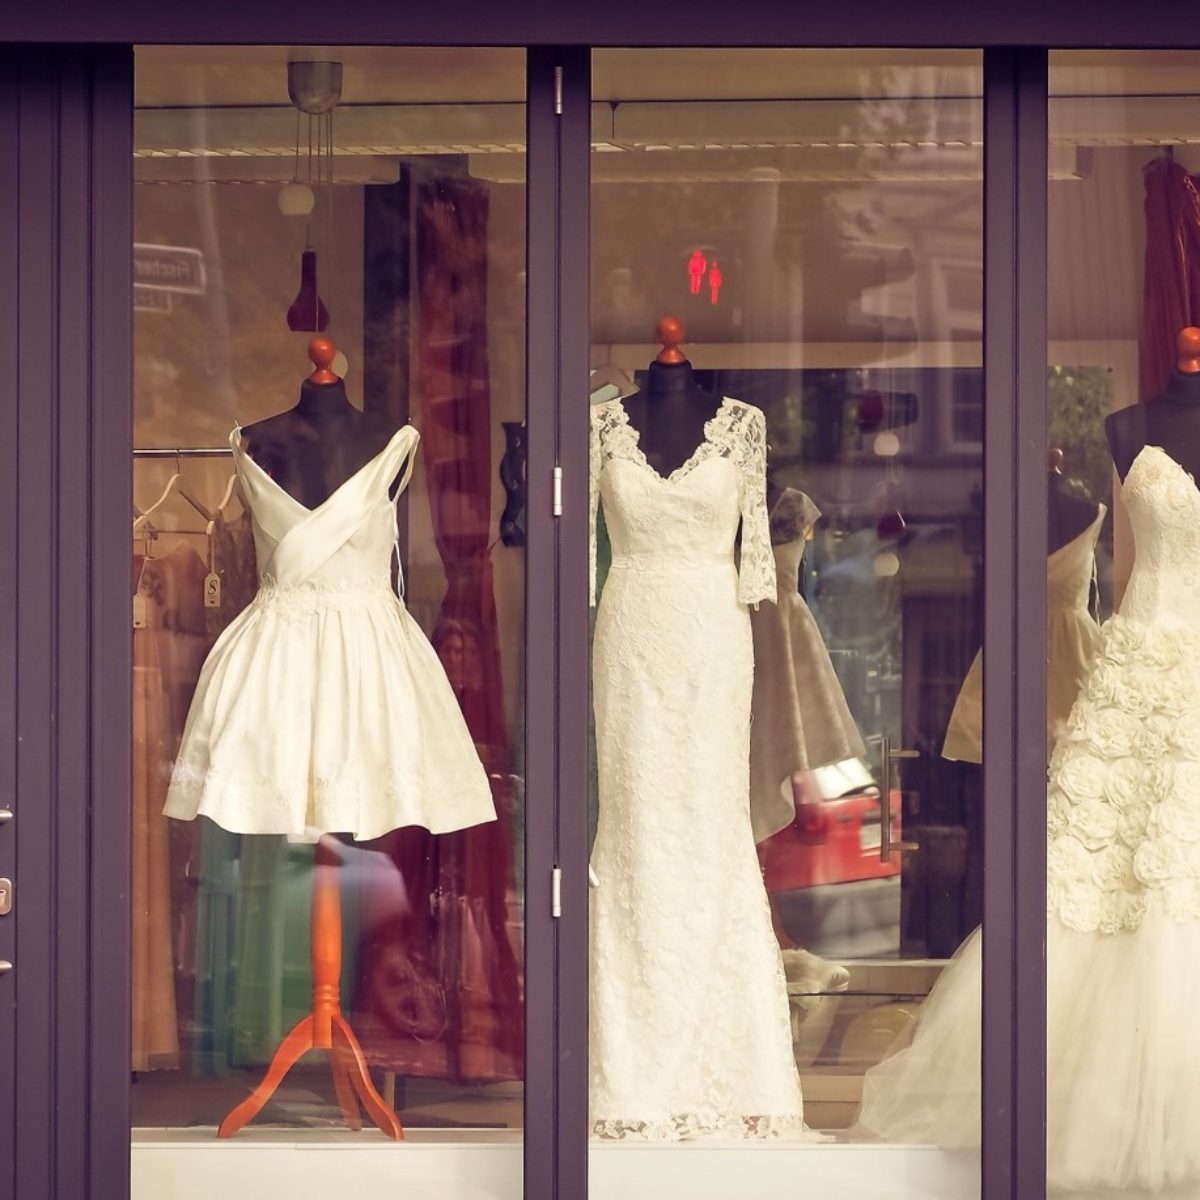 Why Window Displays are Important in Retail Stores